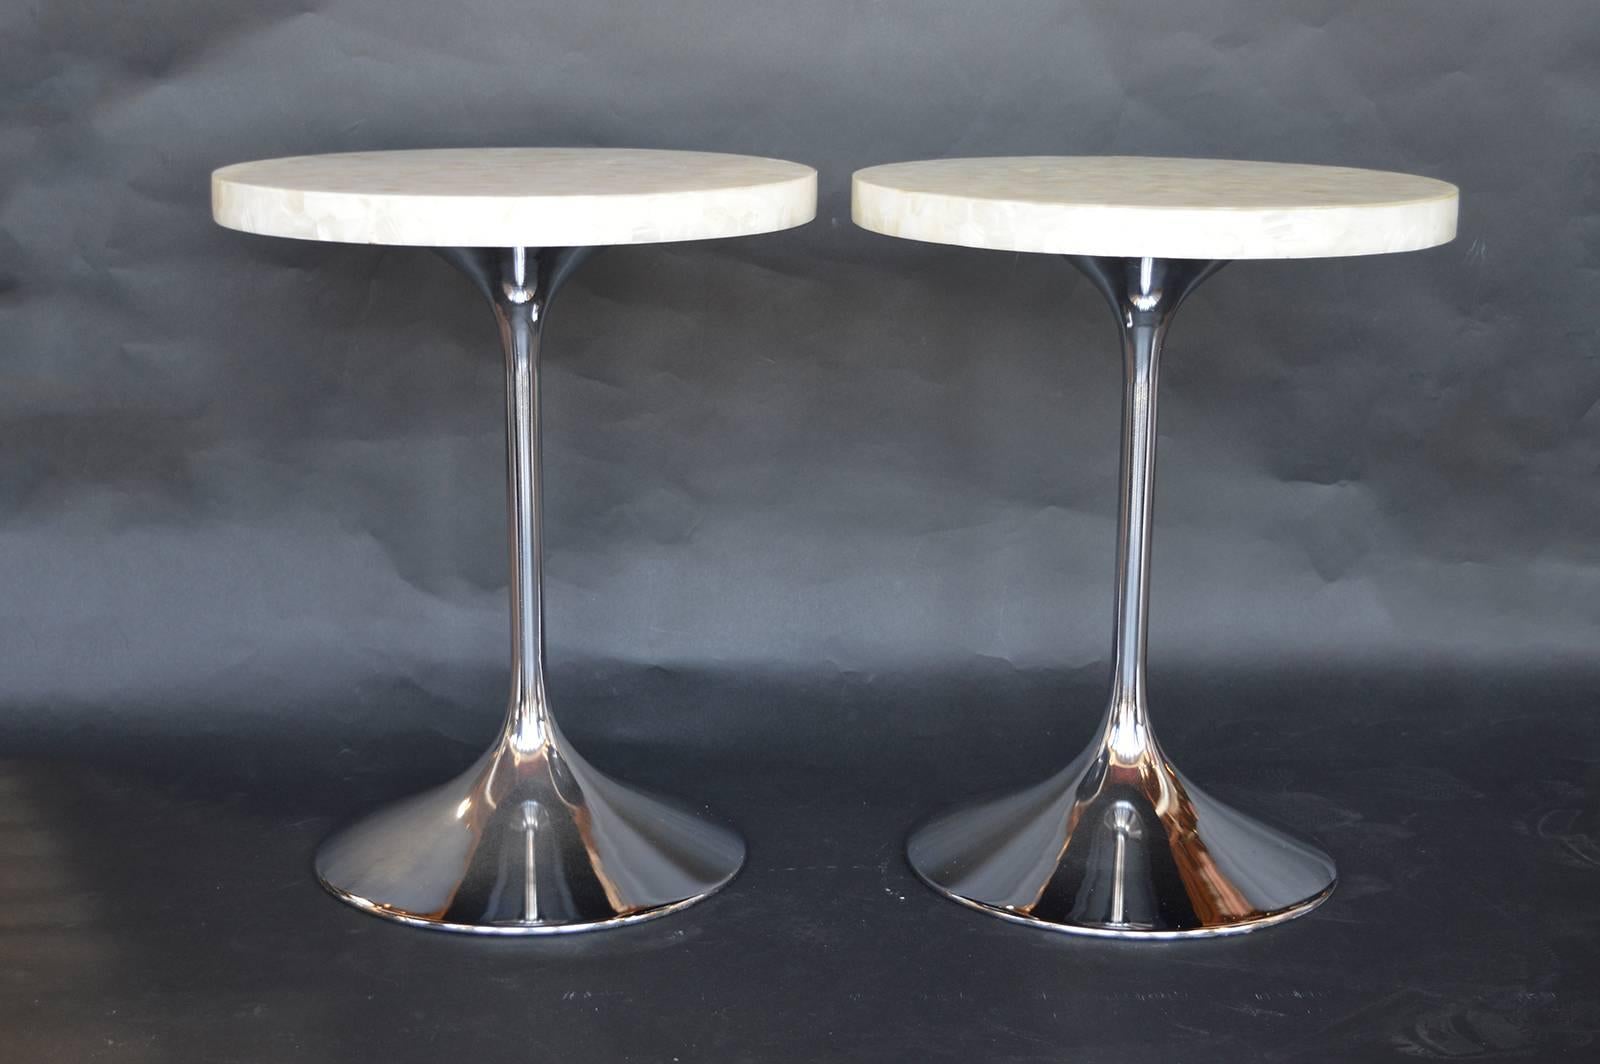 Pair of honeycomb mother-of-pearl side tables with chrome pedestal.